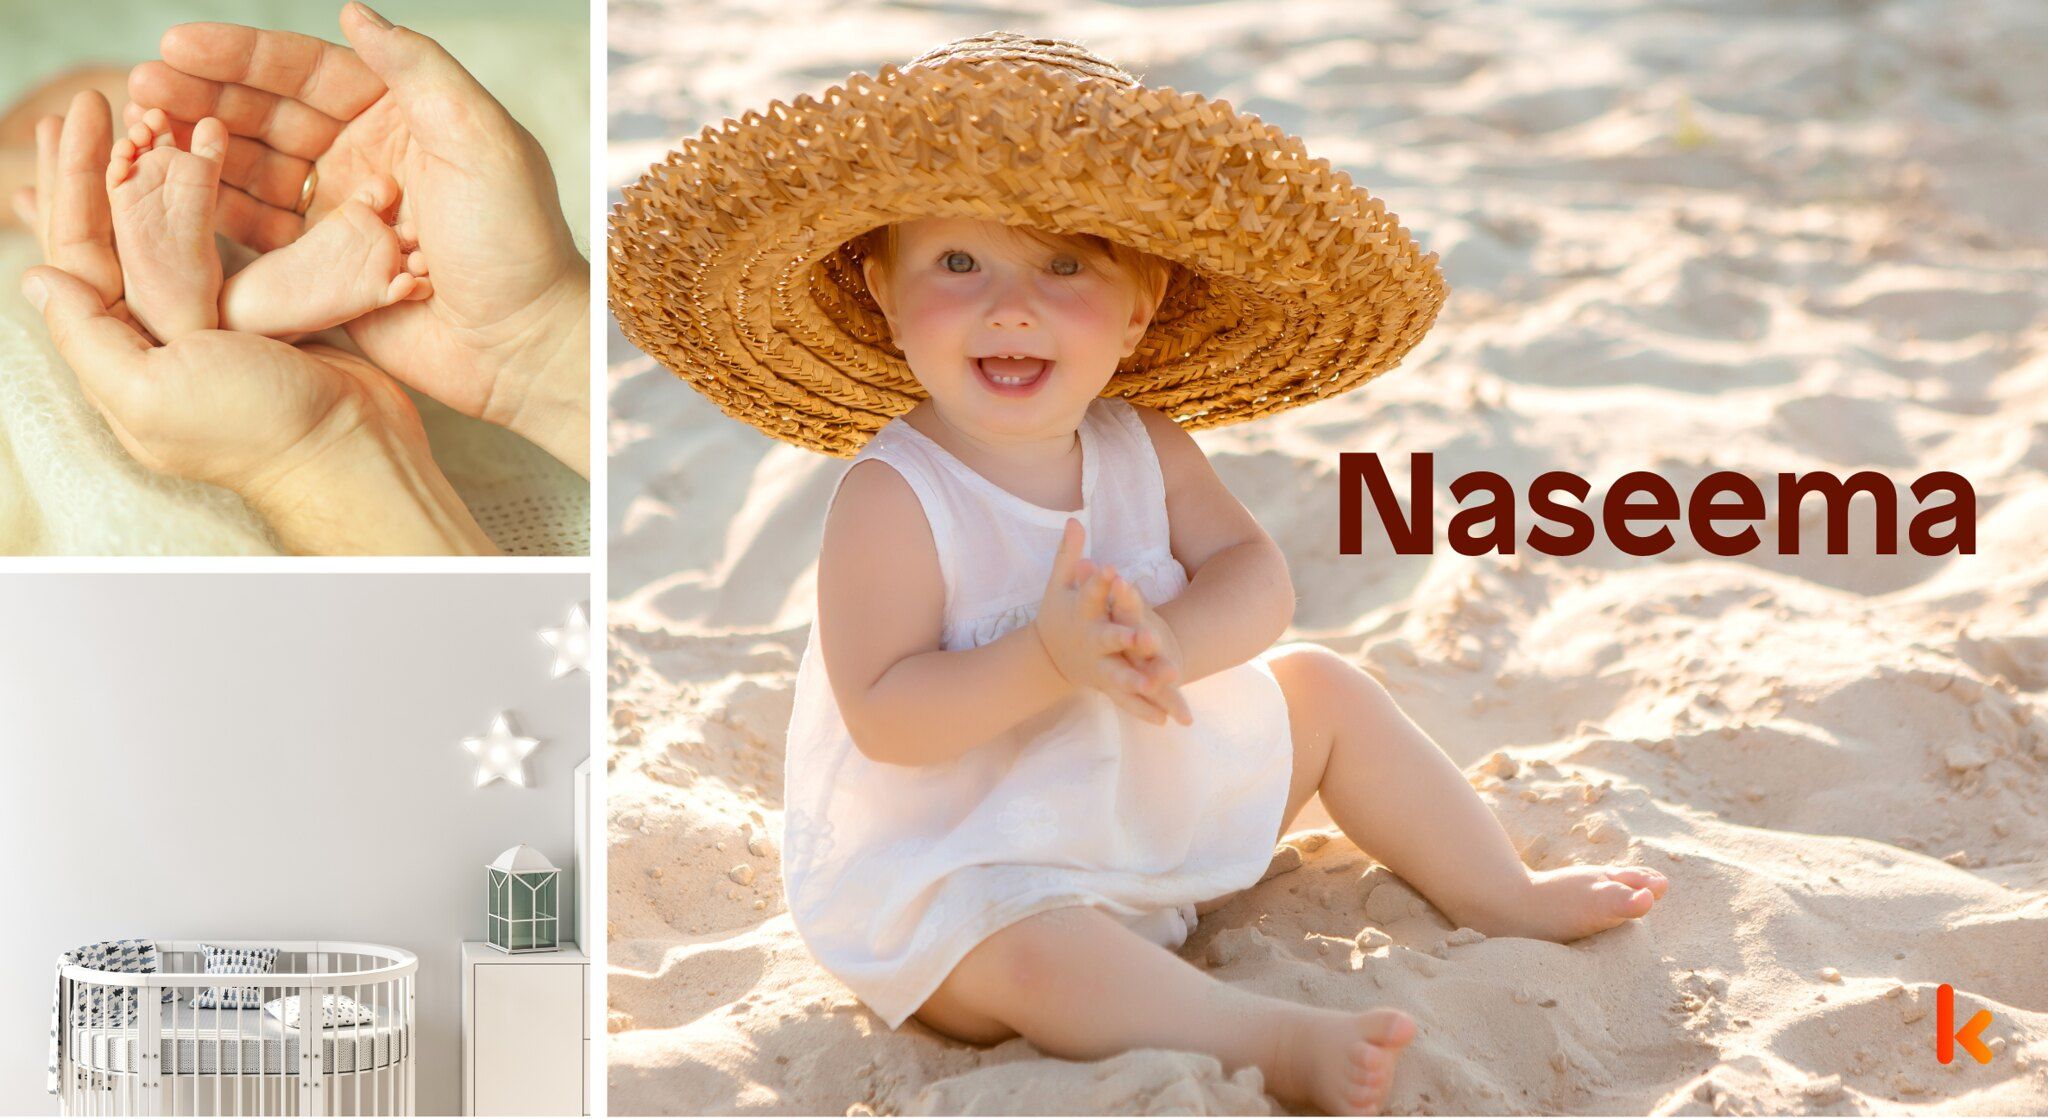 Meaning of the name Naseema